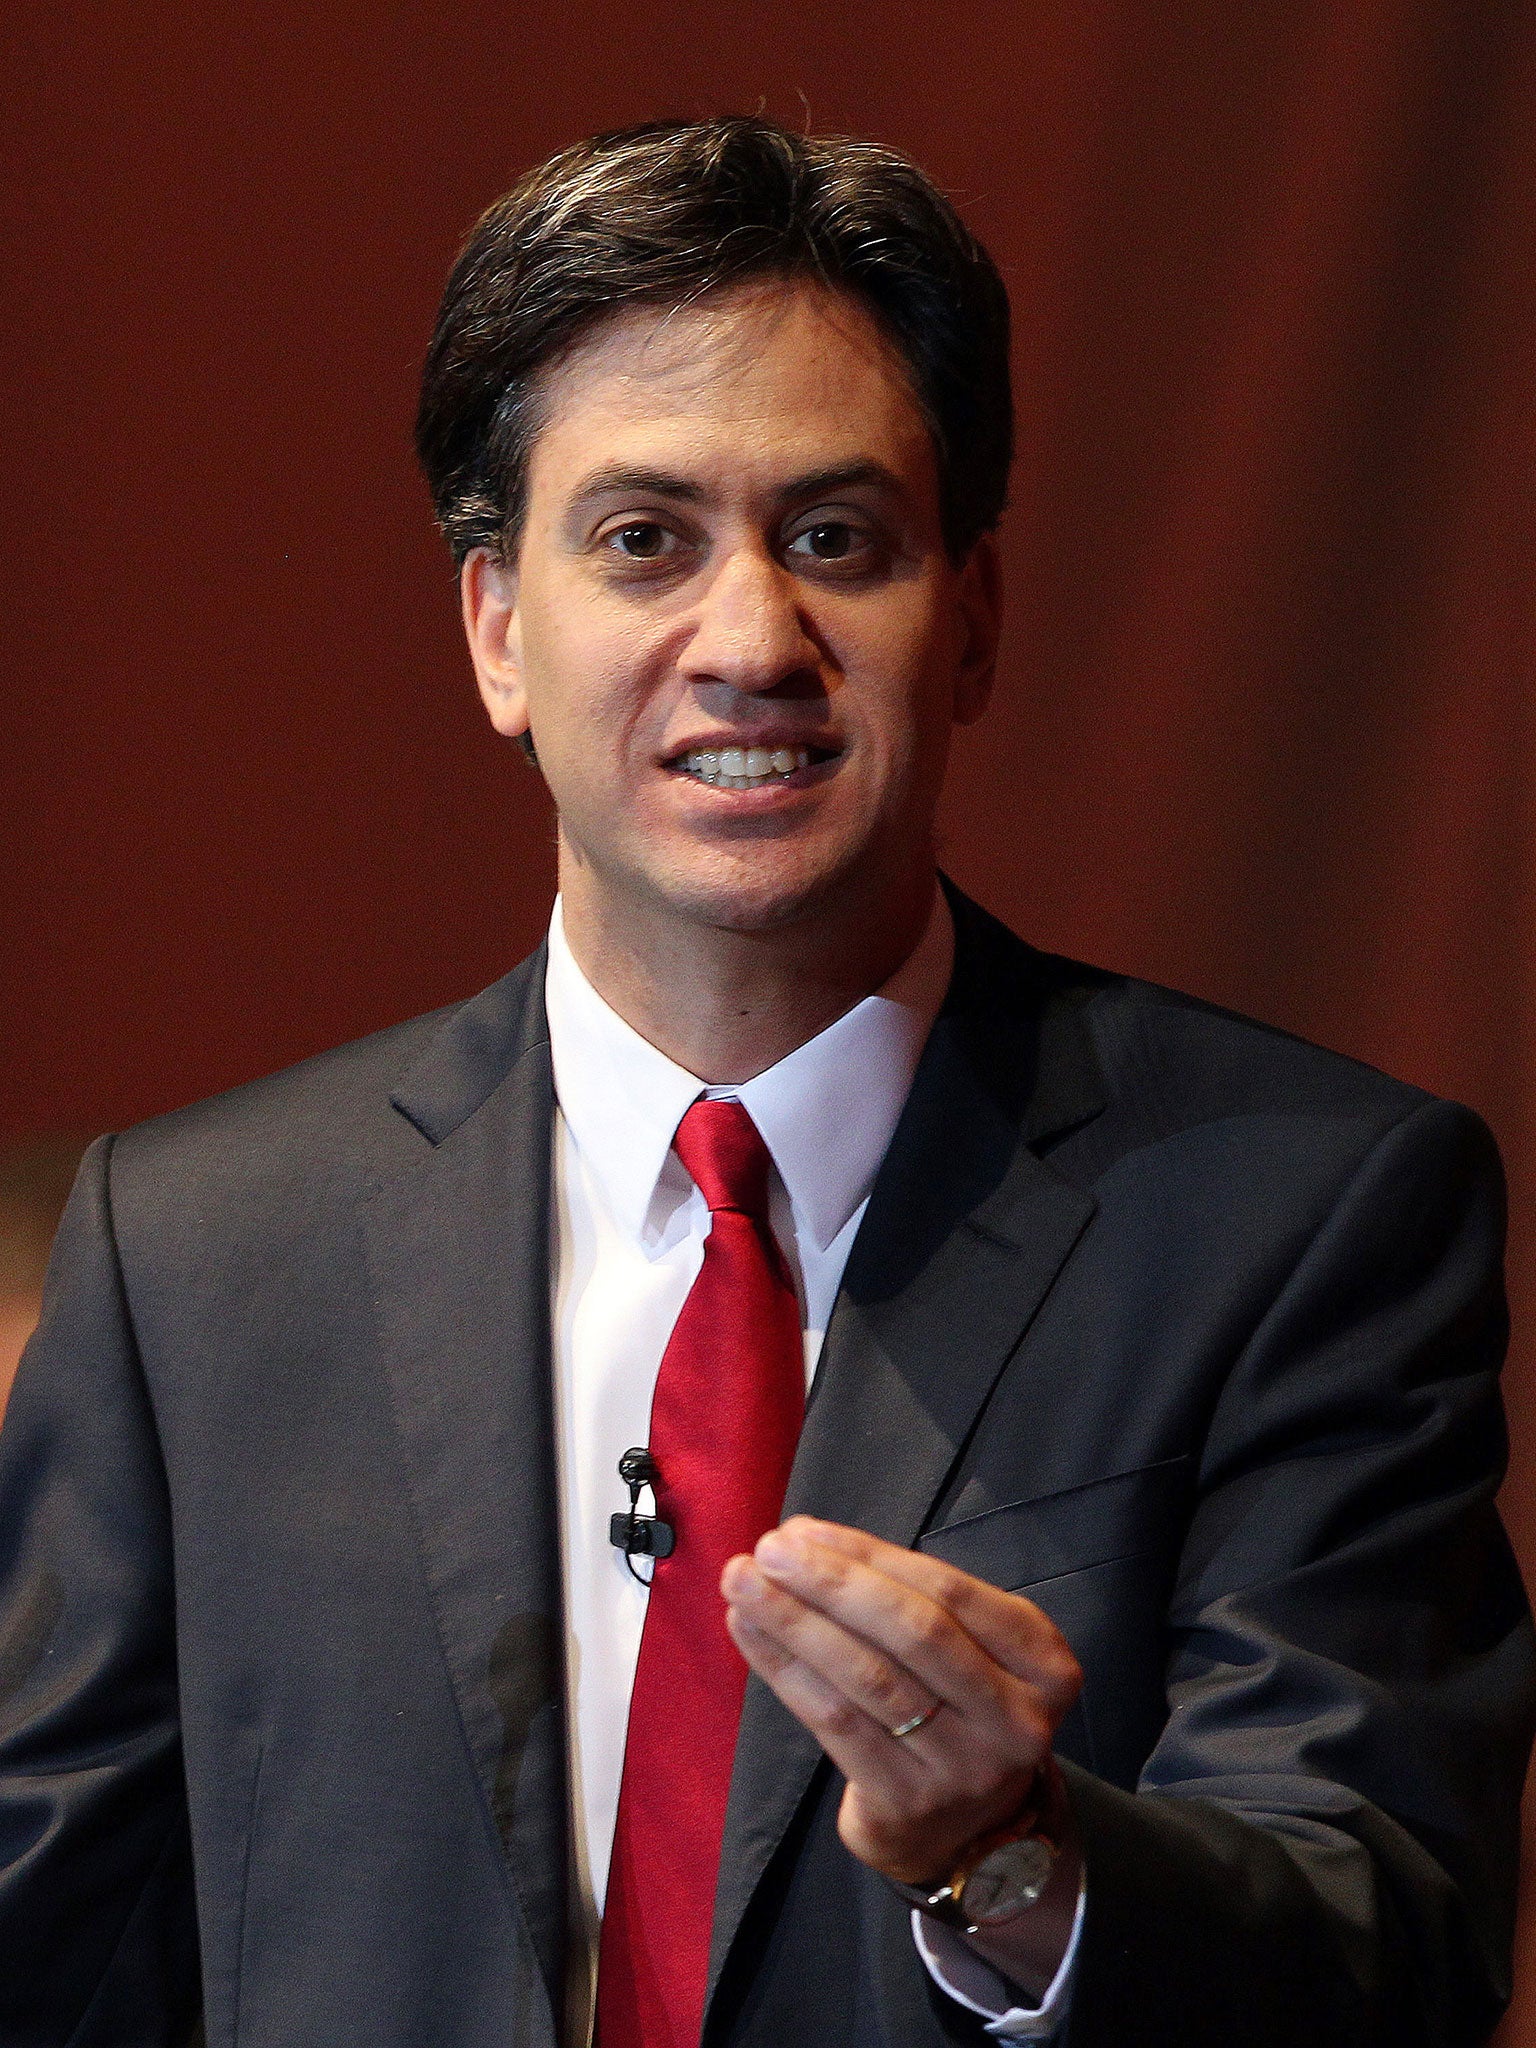 Labour will make a fresh attempt to switch attention from Ed Miliband’s leadership as it sets out plans to lower the tax burden on business and industry